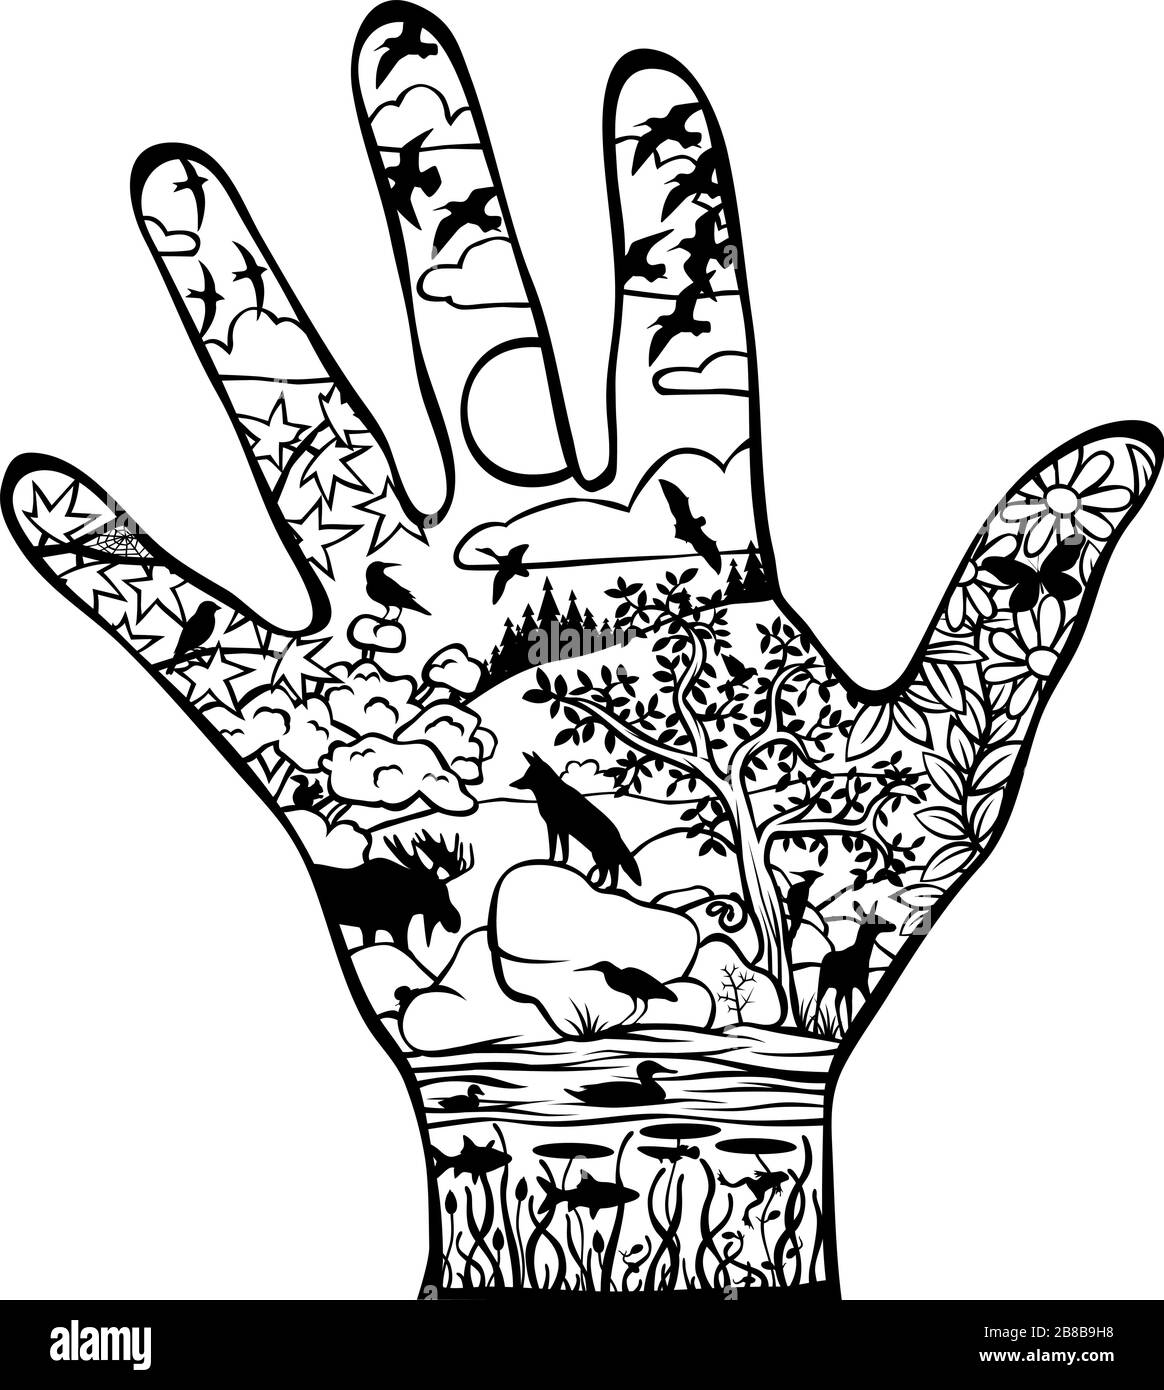 Editable vector illustration of the natural world within a hand outline Stock Vector